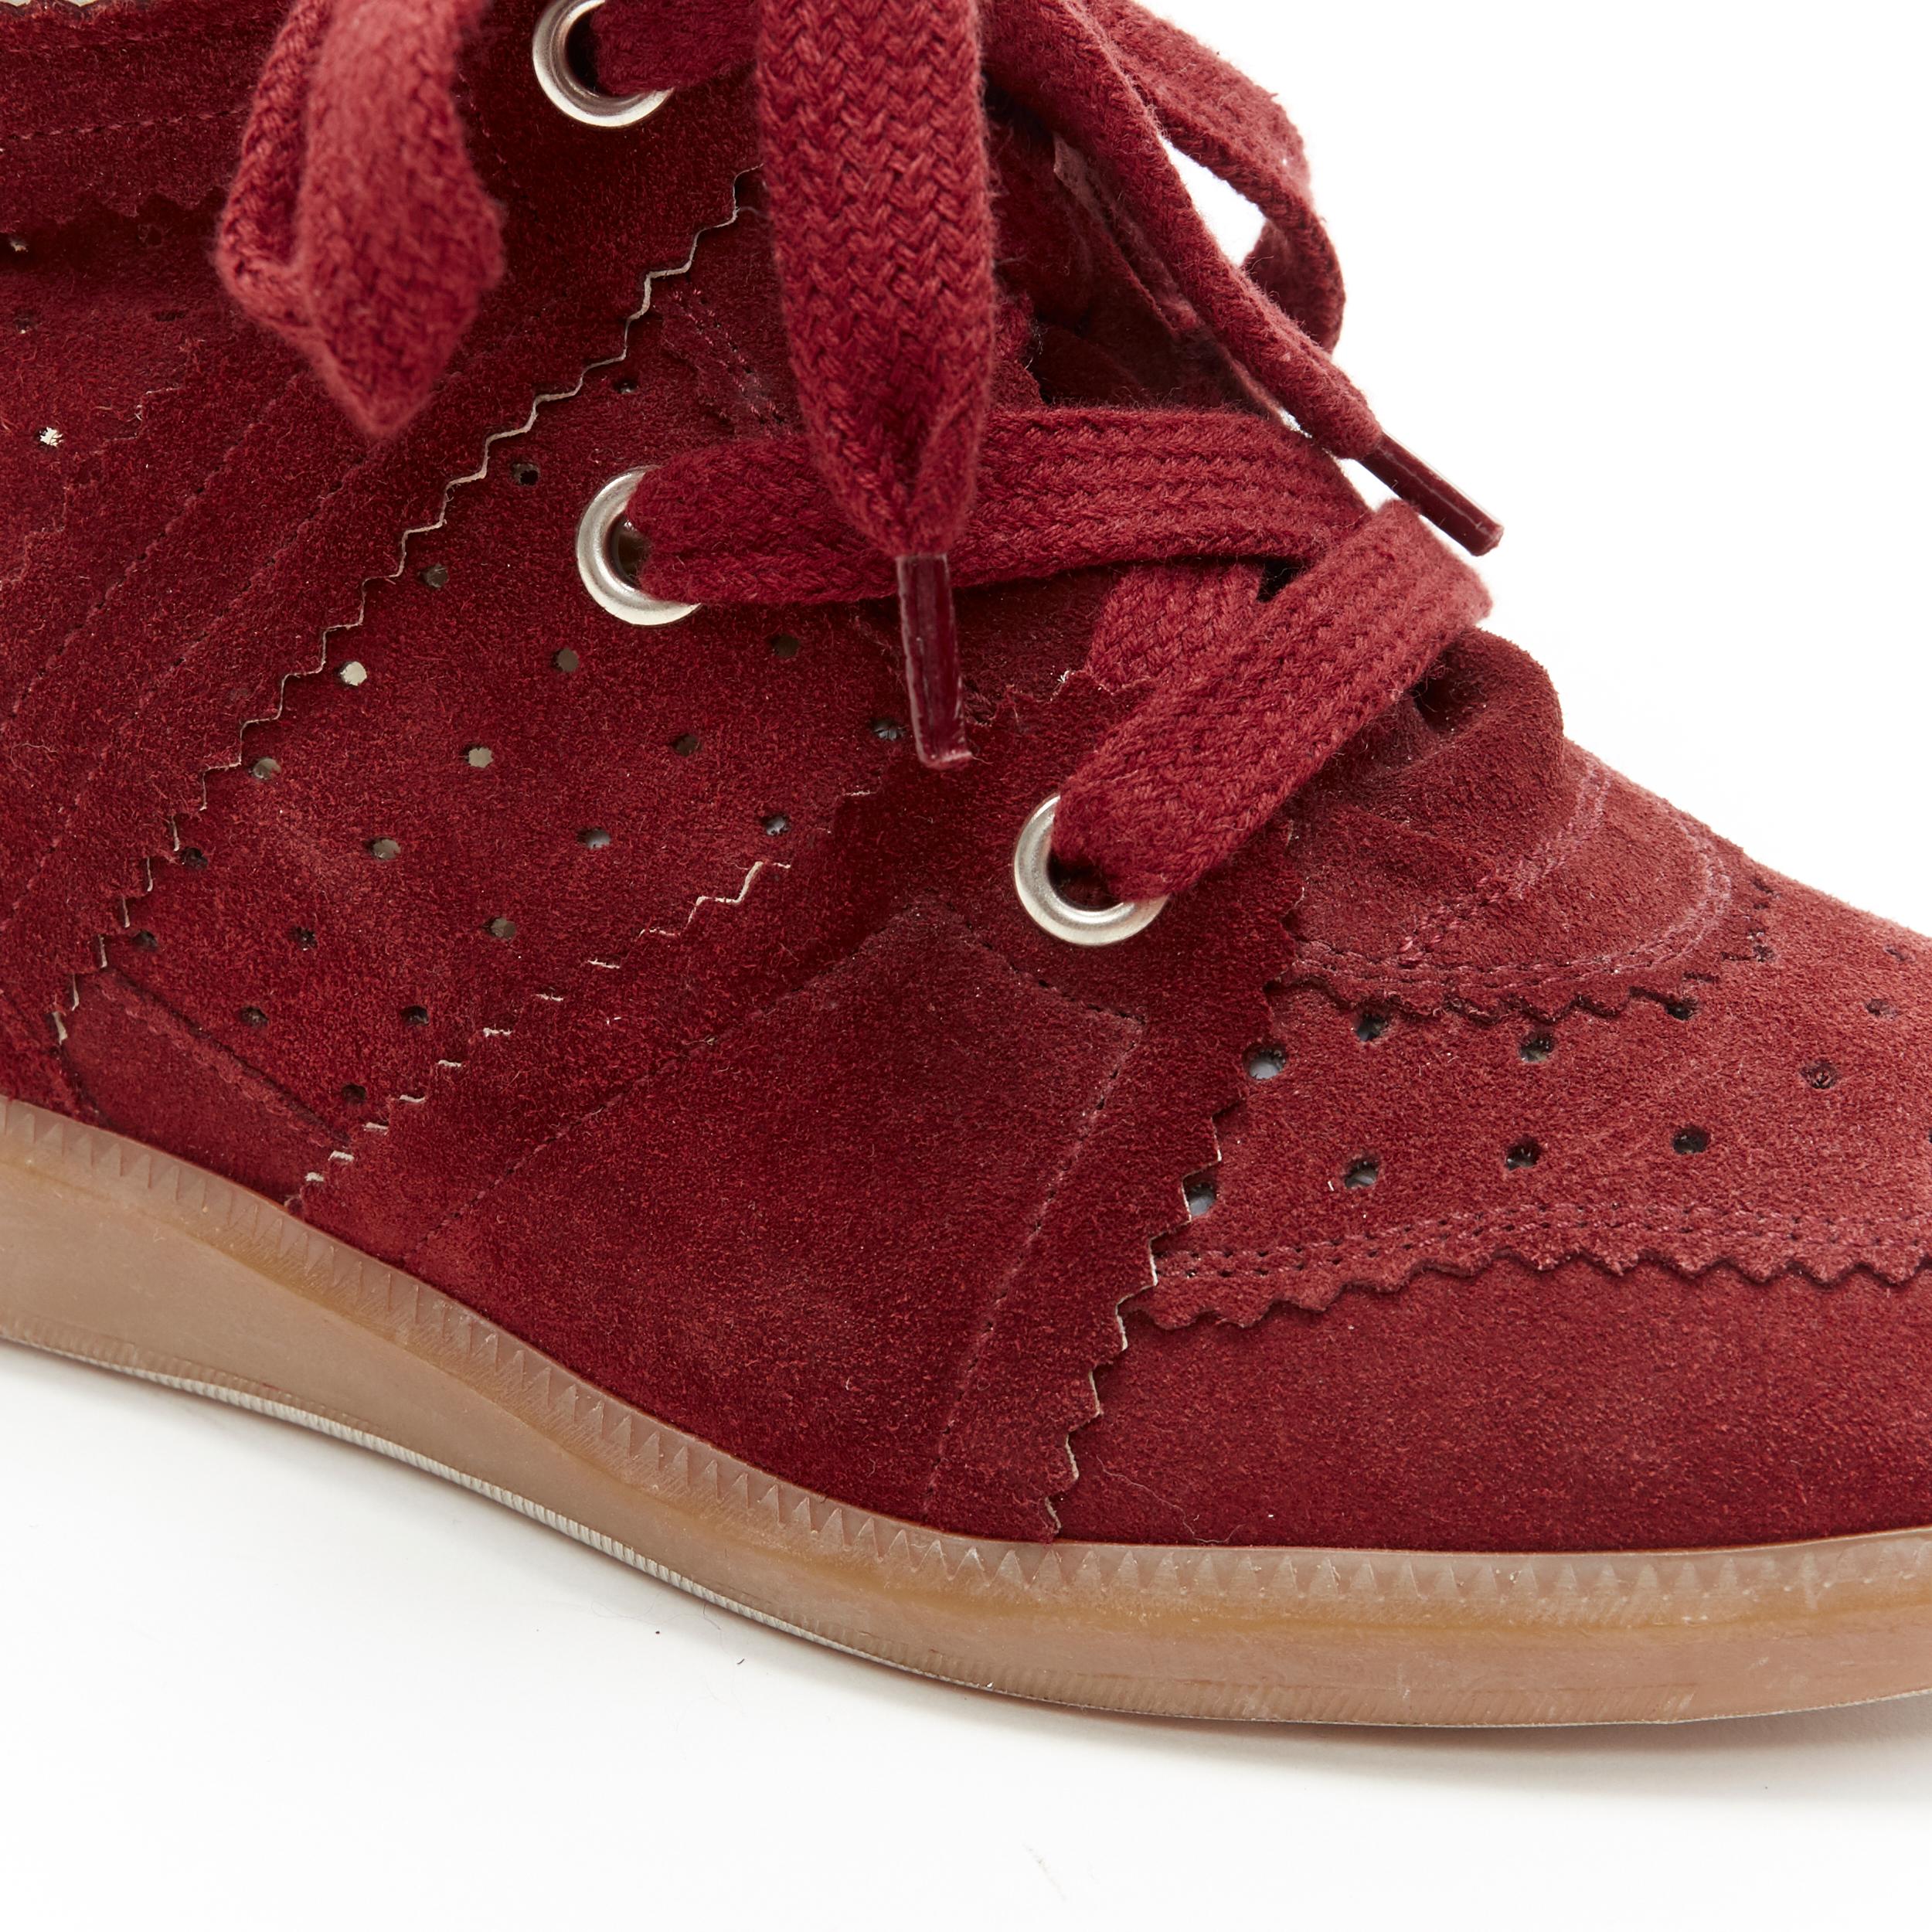 new ISABEL MARANT Bobby Burgundy suede lace up concealed wedge sneaker EU37 1